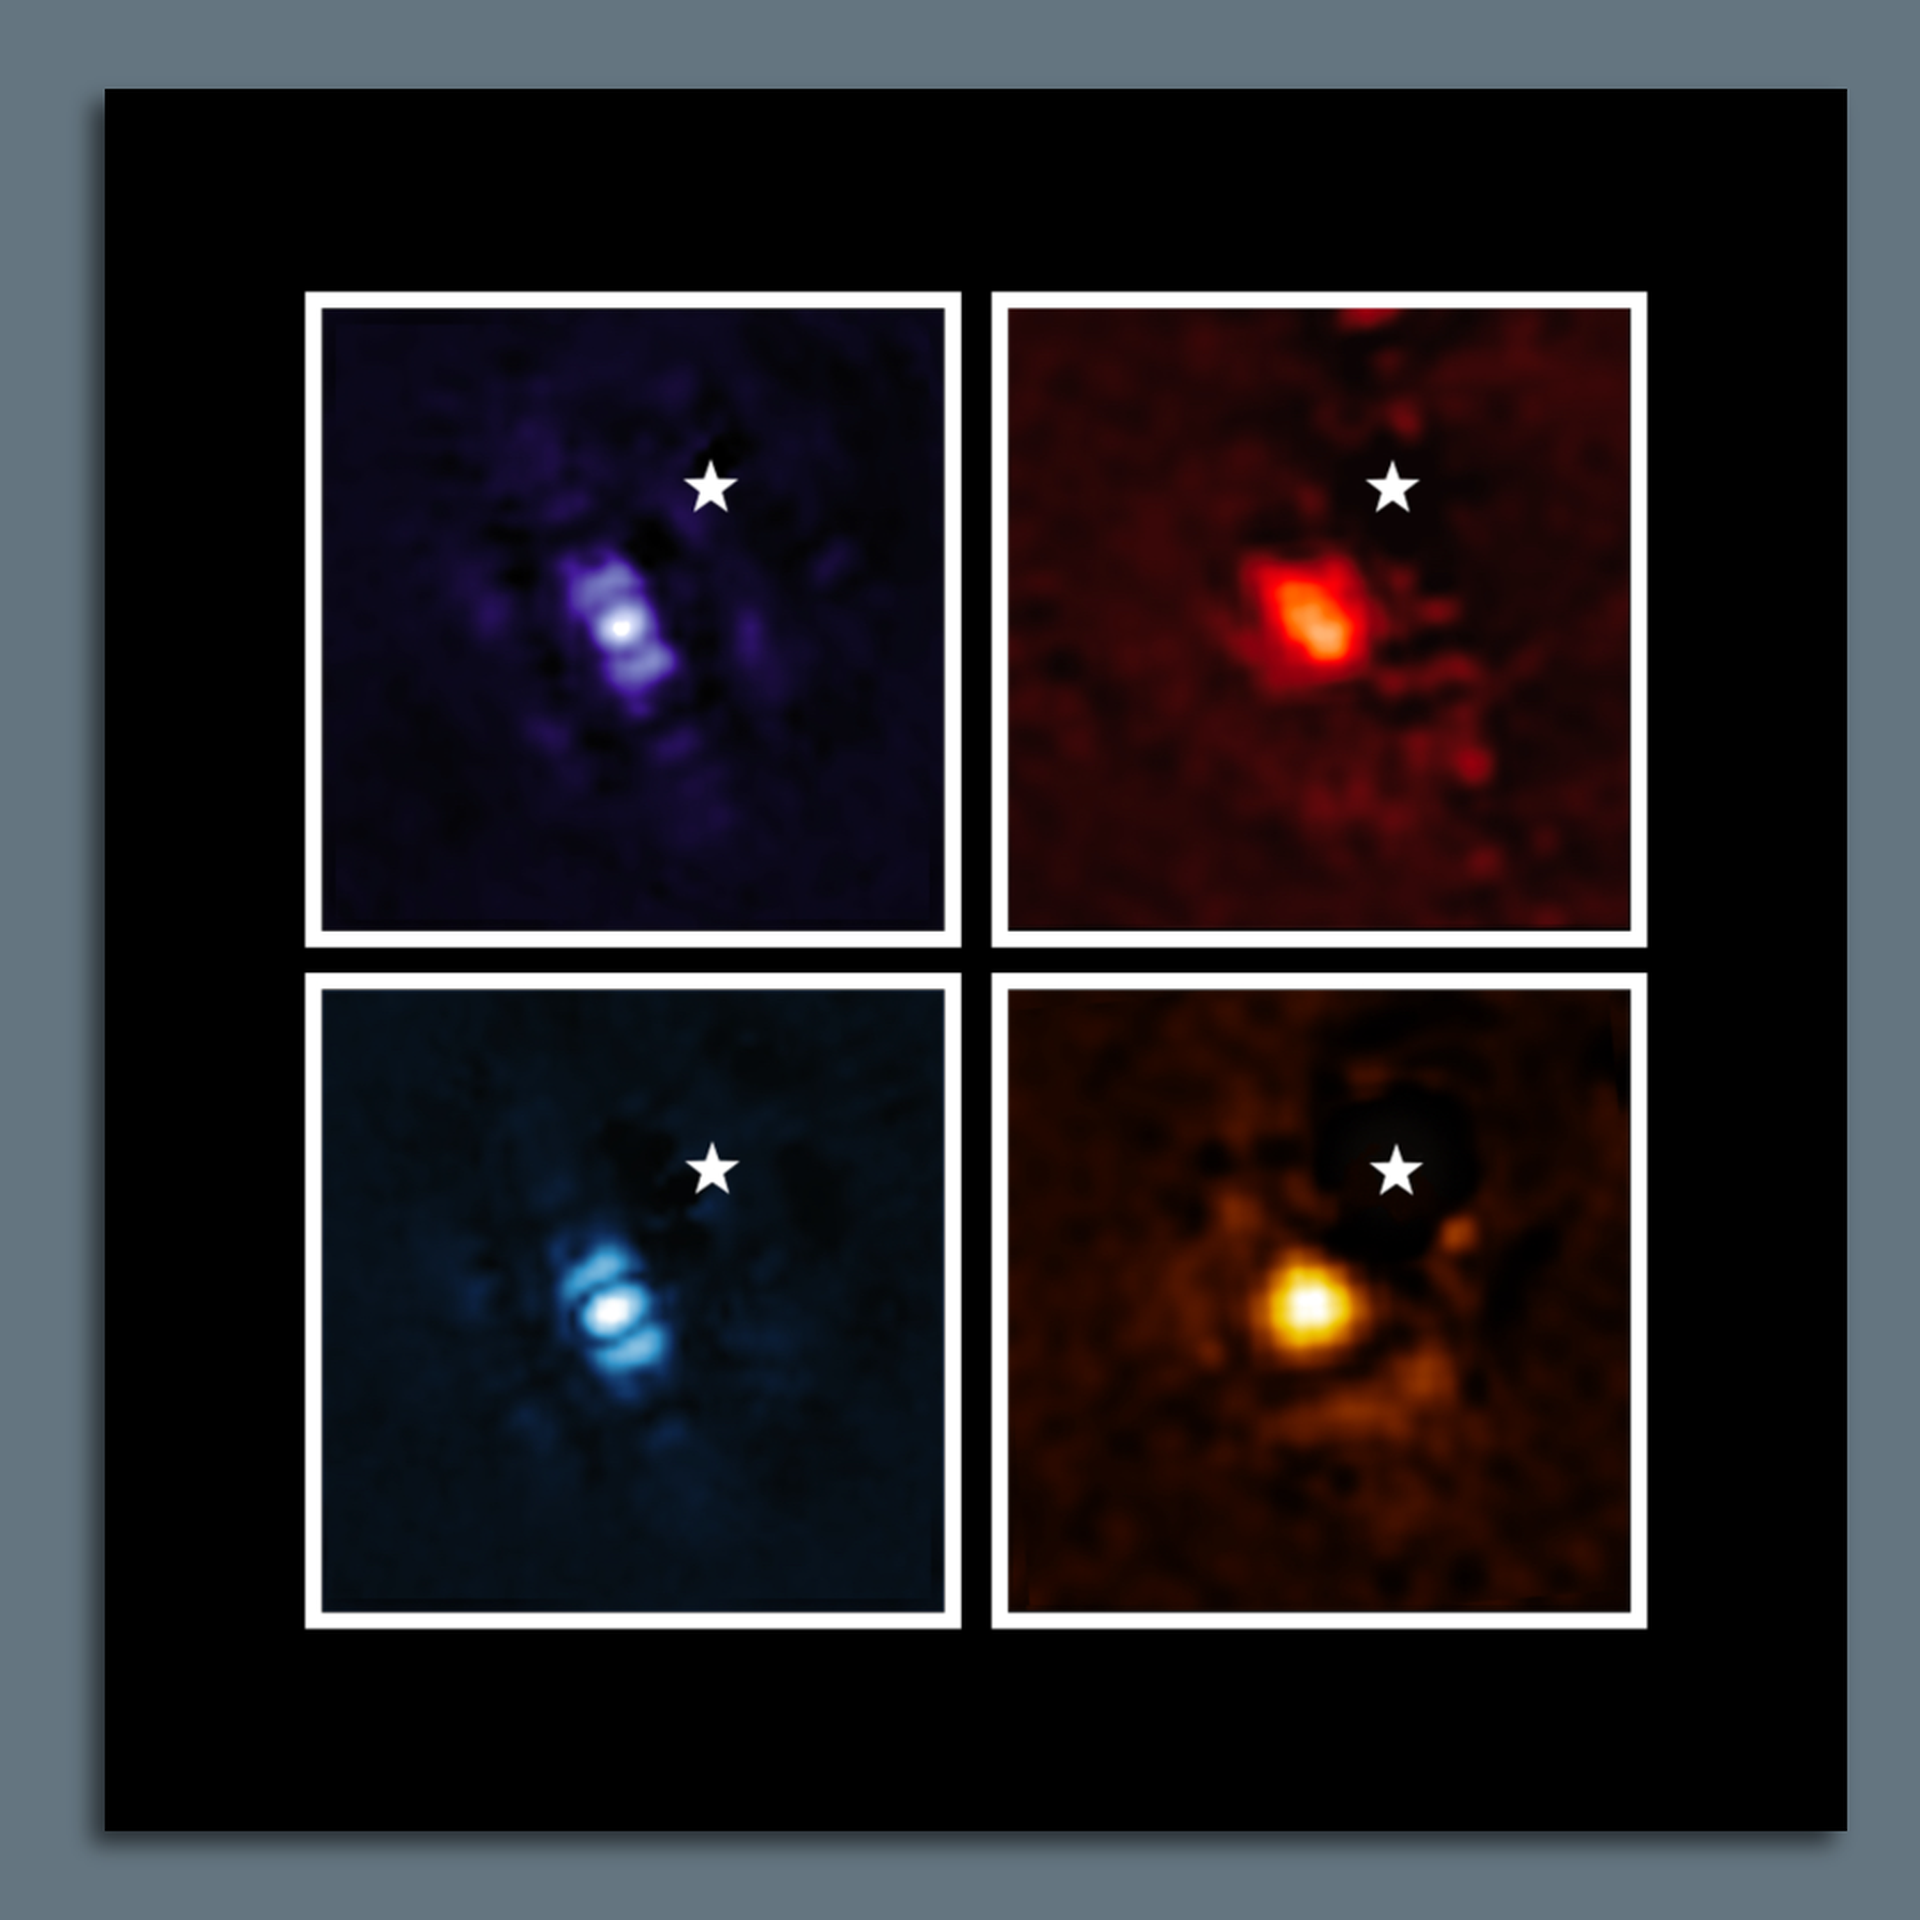 Exoplanet HIP 65426 b in different bands of infrared light. Credit: NASA/ESA/CSA, A Carter (UCSC), the ERS 1386 team, and A. Pagan (STScI)